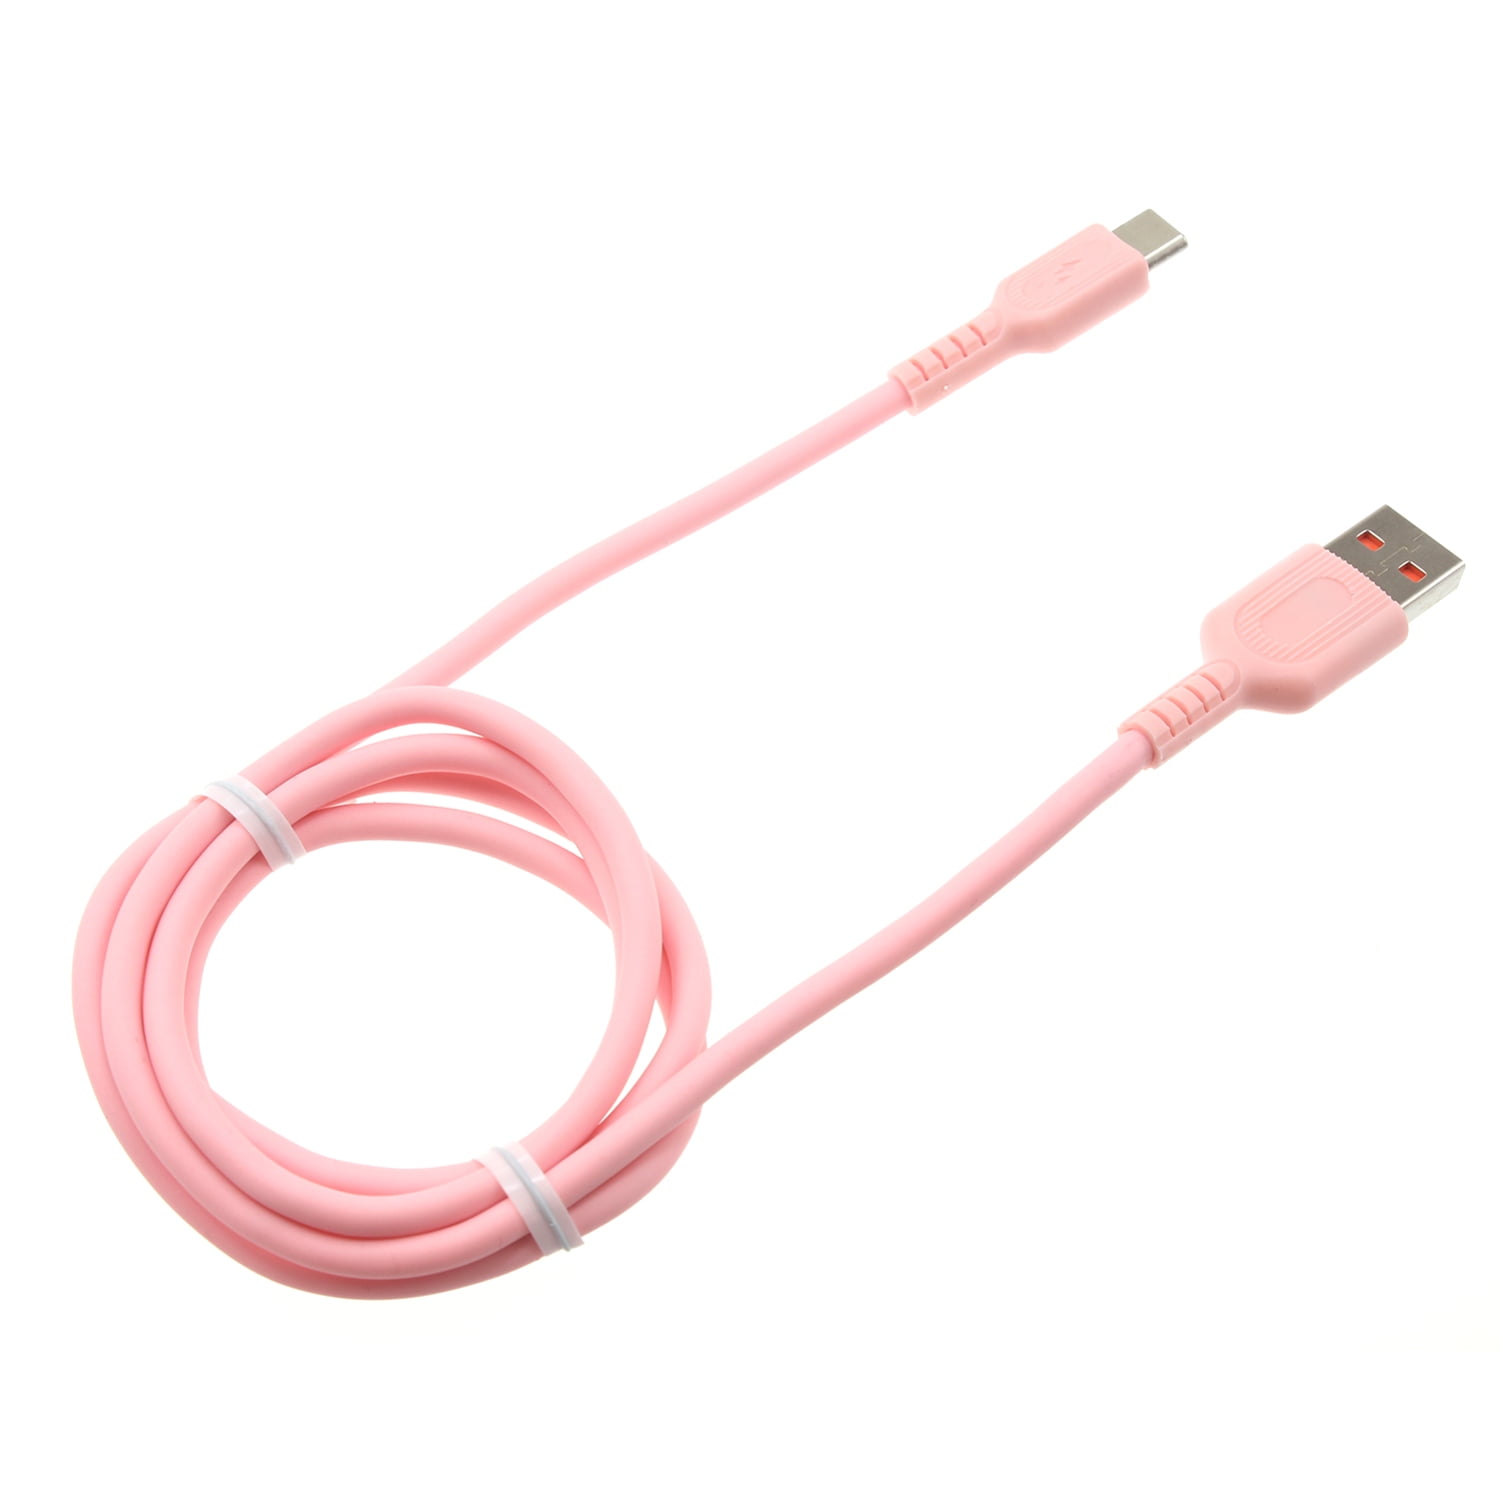 6FT USB-C CABLE PINK CHARGER CORD POWER WIRE TYPE-C FAST CHARGE for CELL PHONES 